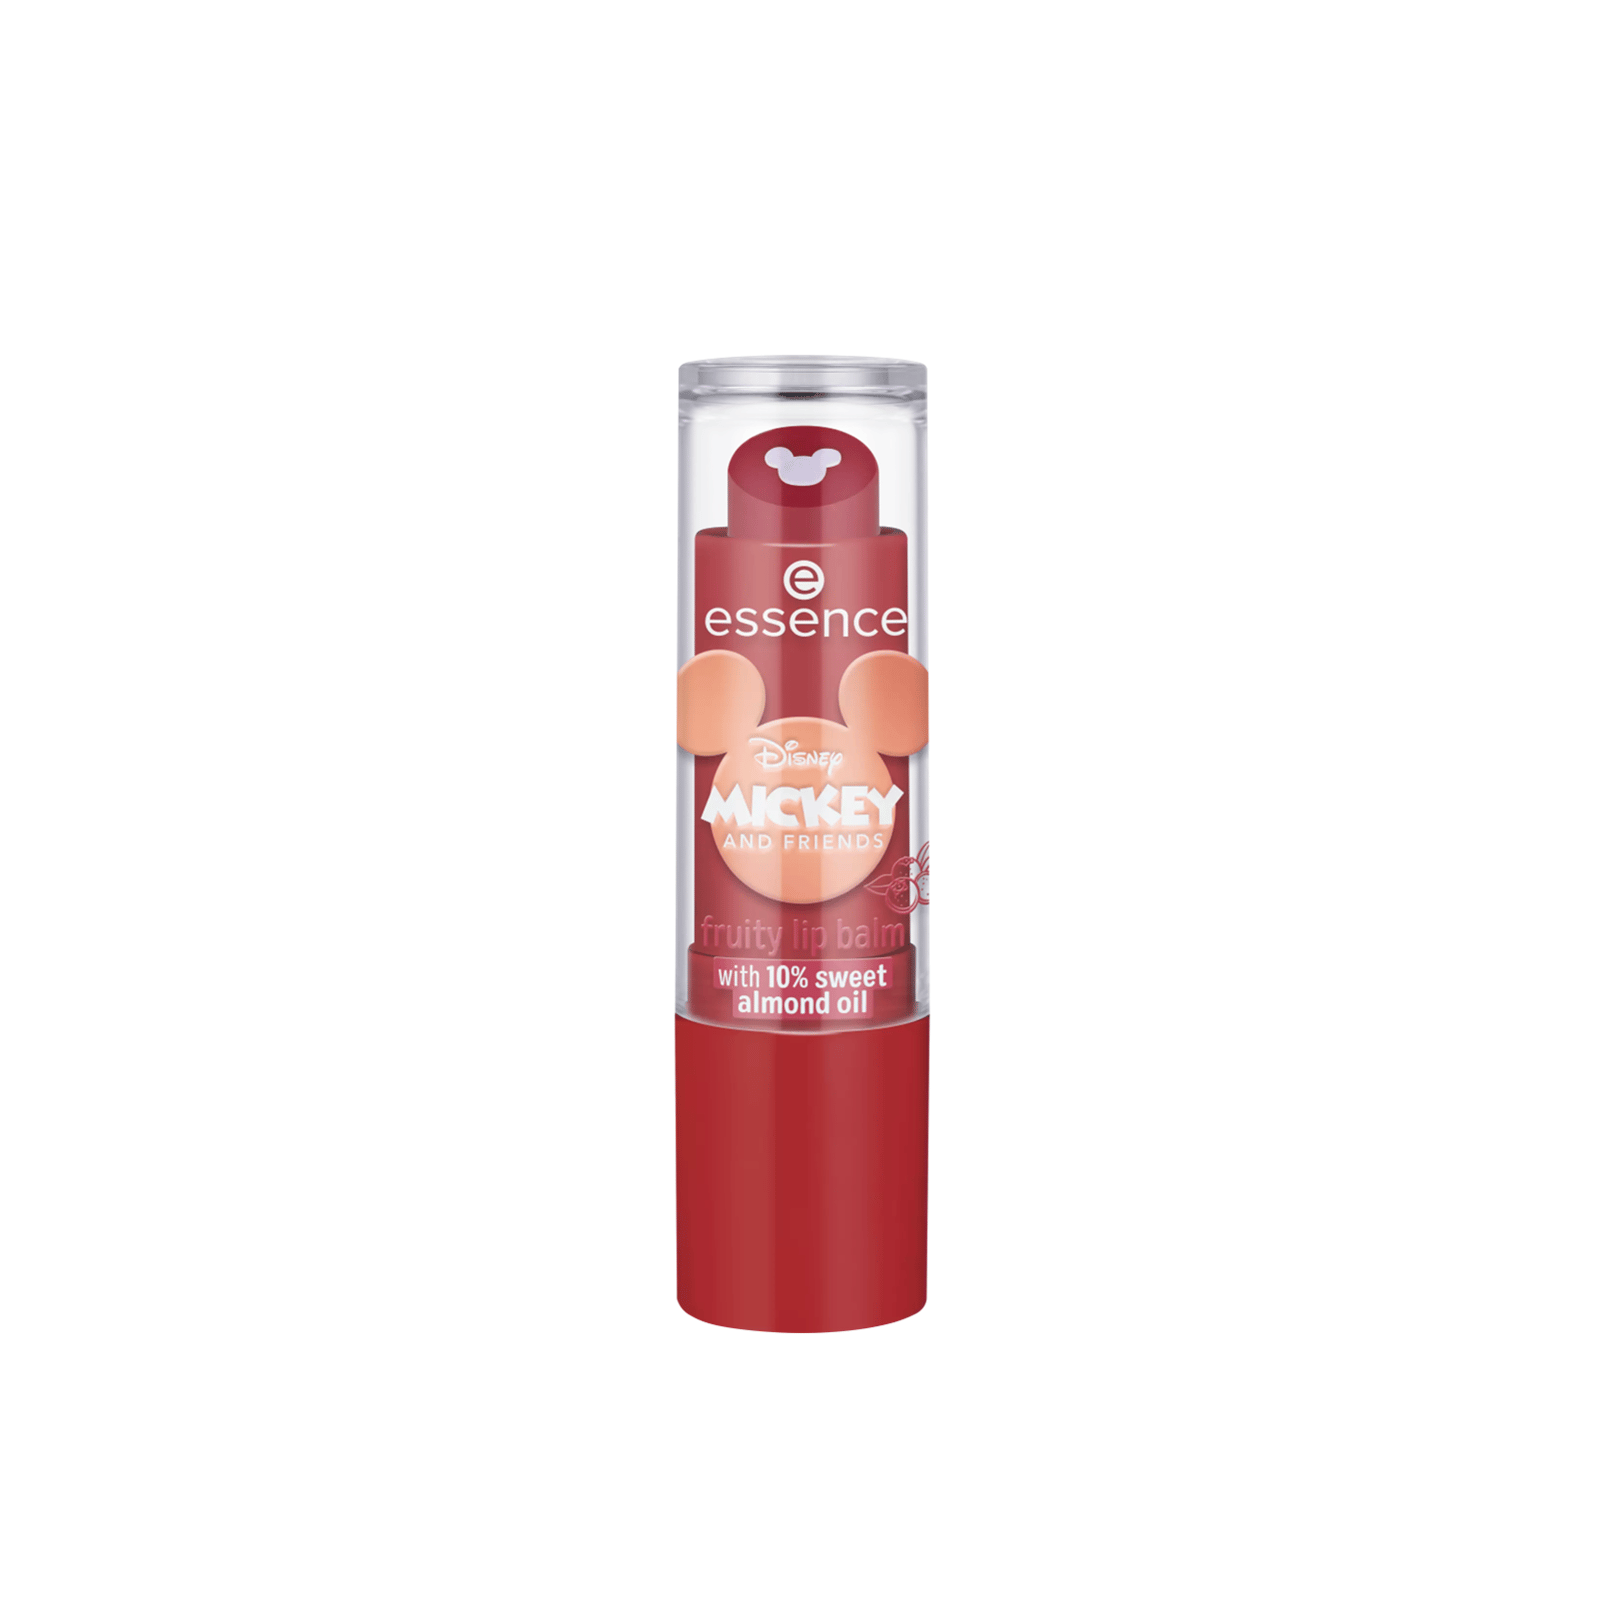 essence Disney Mickey And Friends Fruity Lip Balm 02 Red Berries Vibes! 3g (0.10oz)